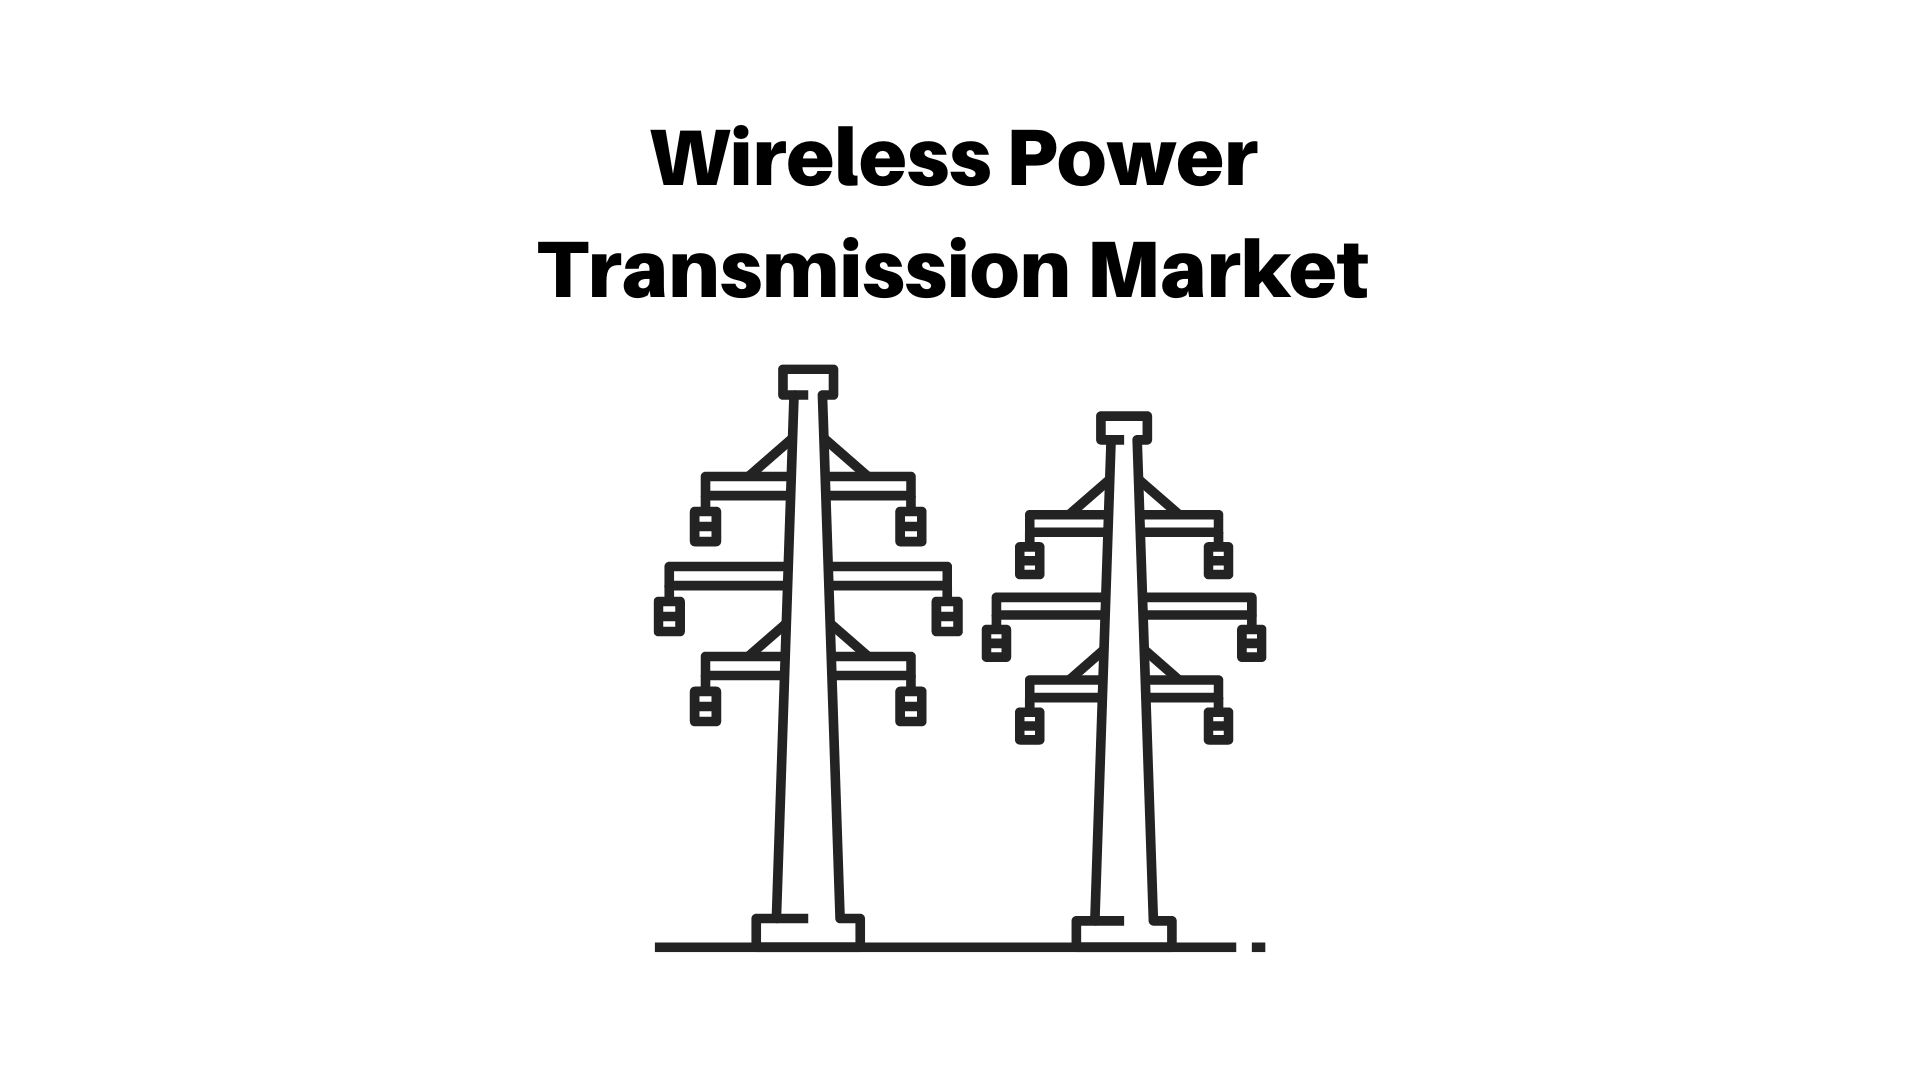 Wireless Power Transmission System Market is expected to be worth around USD 55.2 Bn by 2032